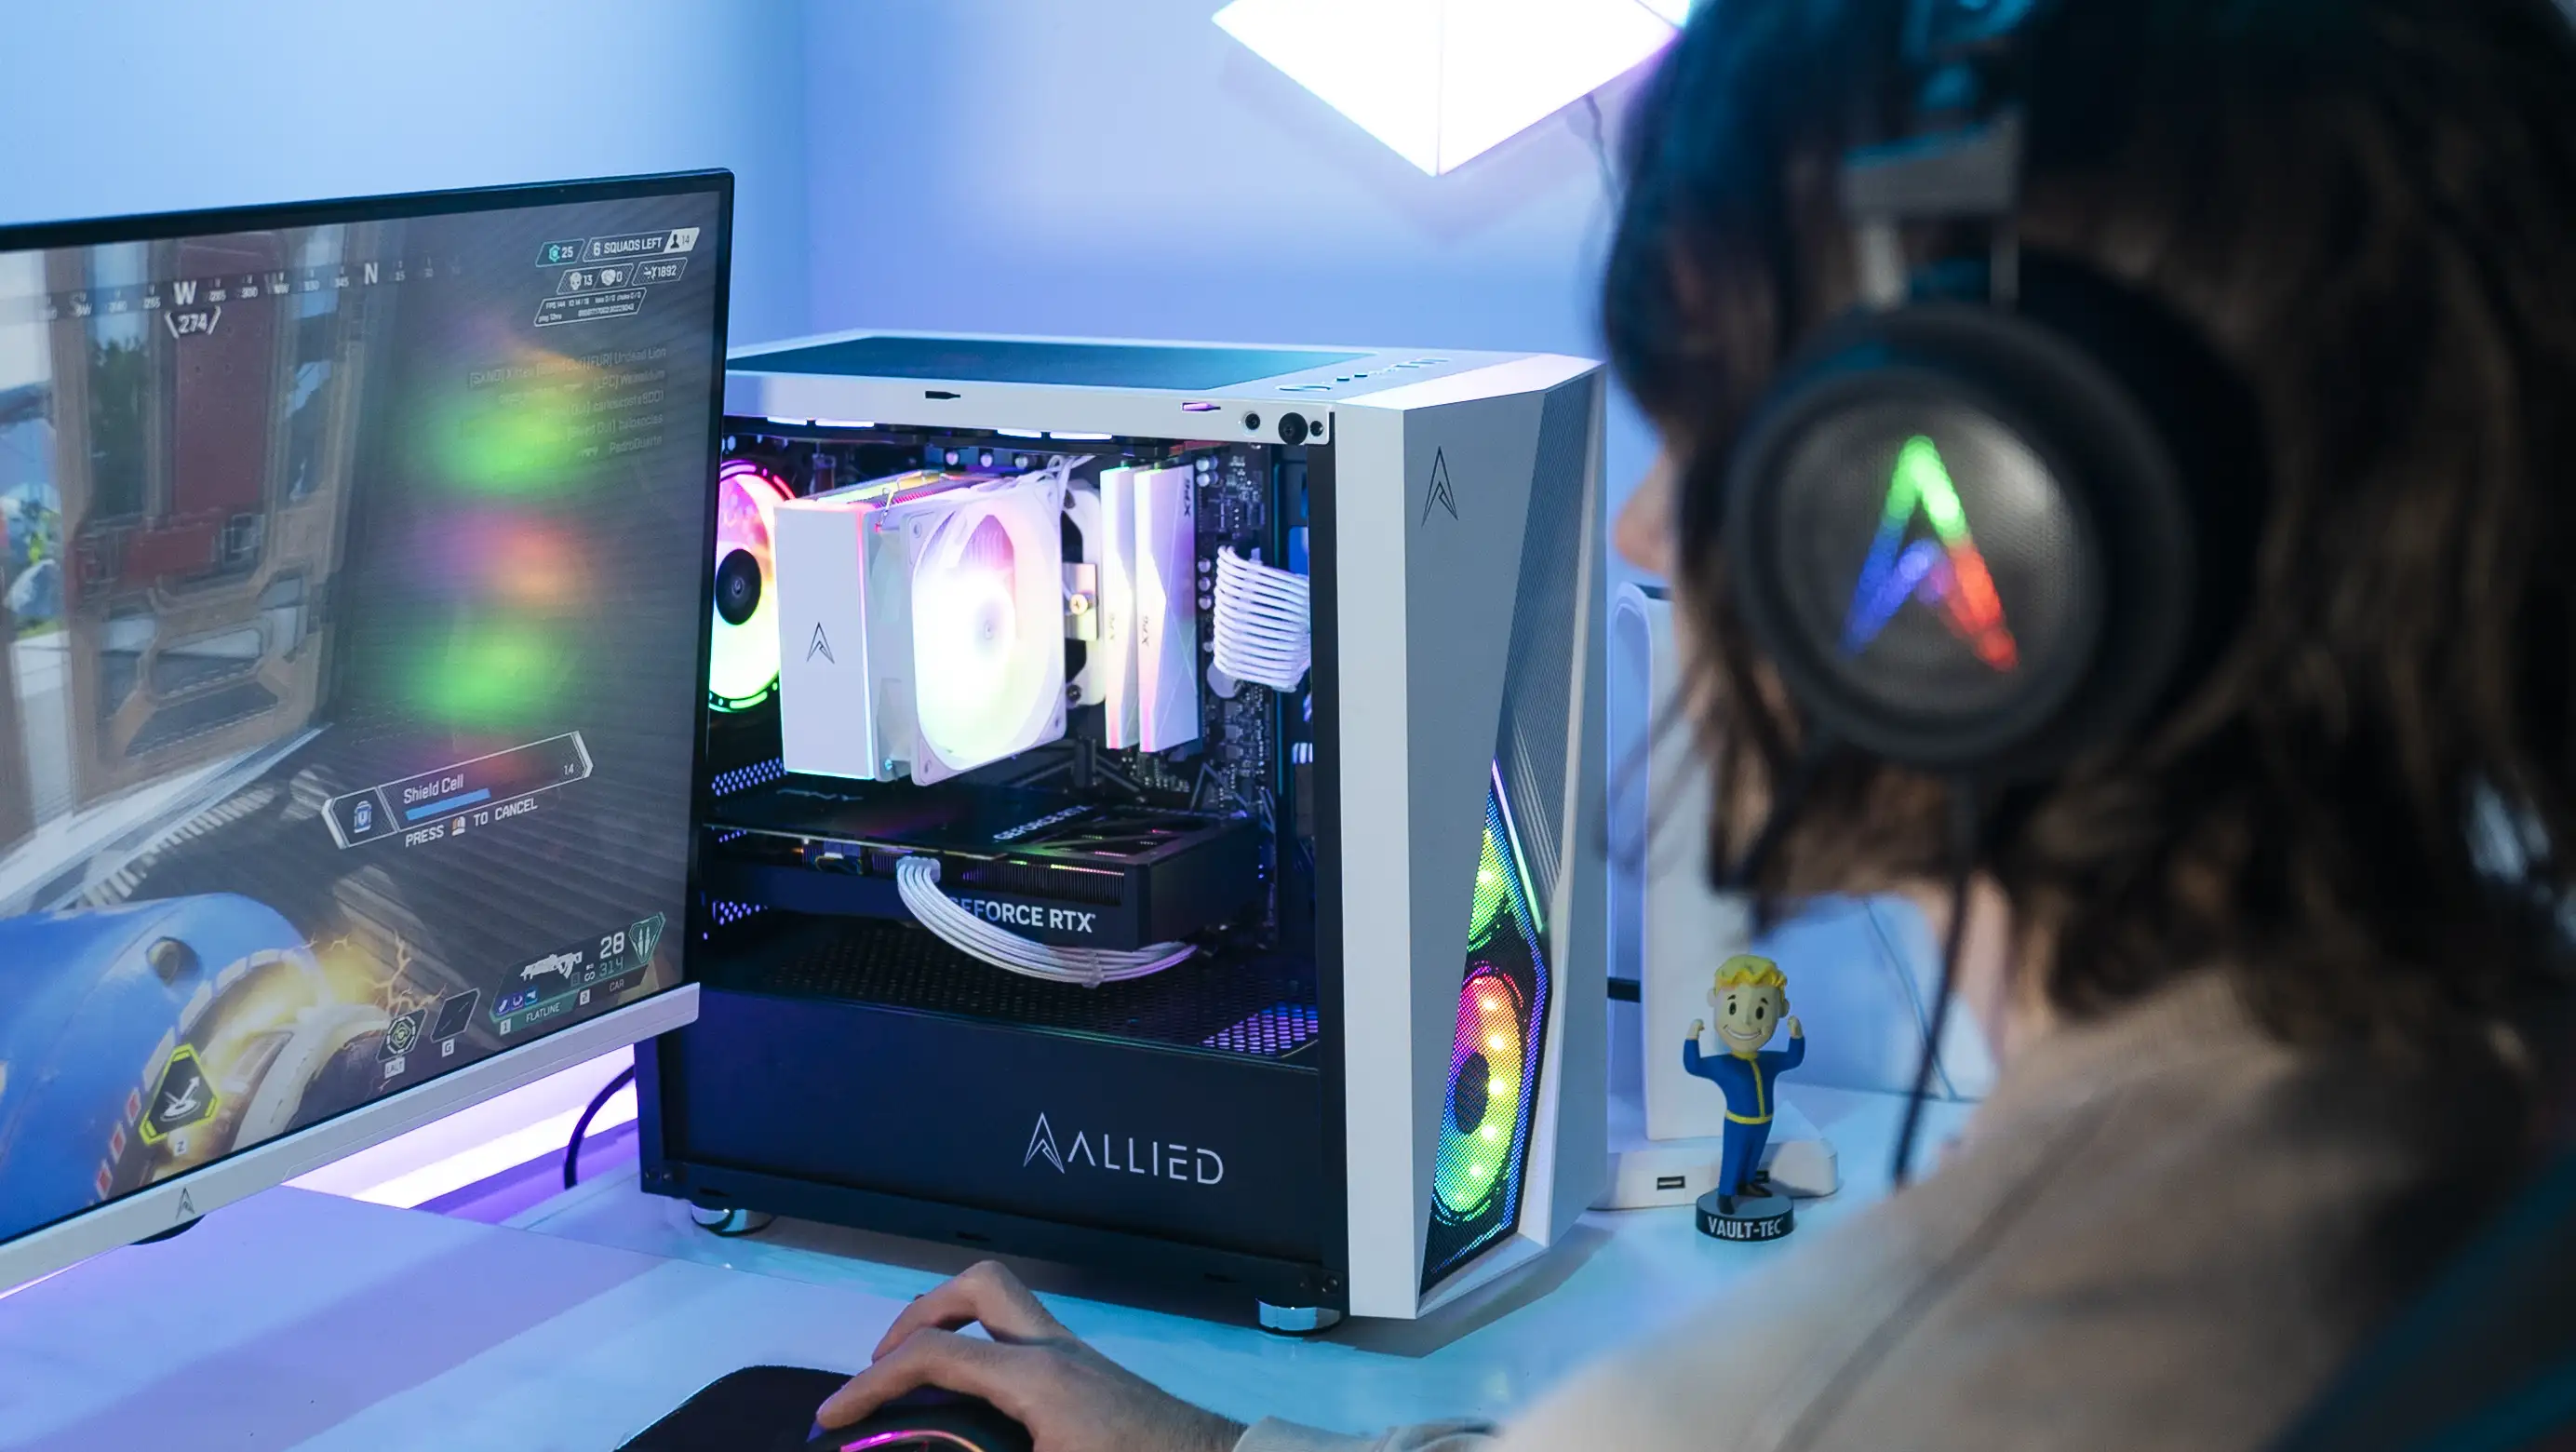 Customizable gaming PCs for building your dream Allied PC